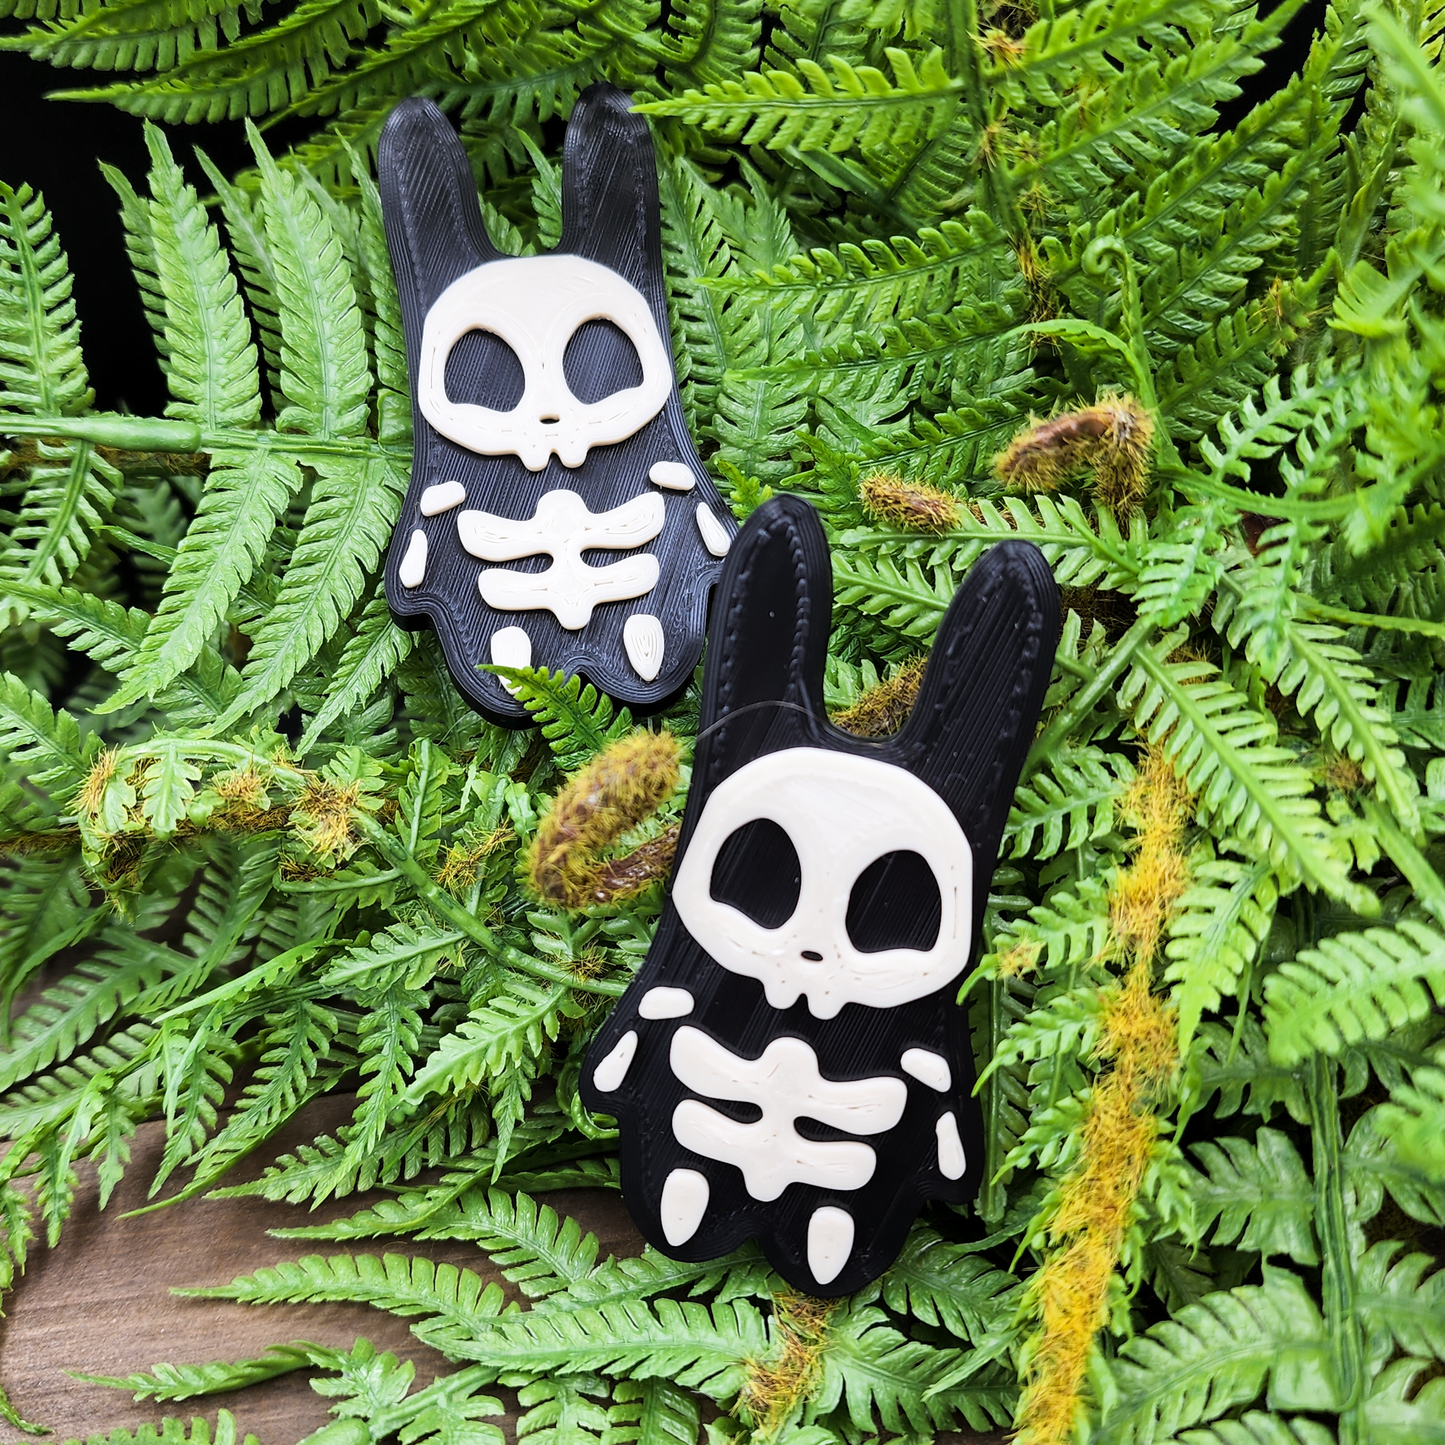 Spooky Halloween Skeleton Keychains and Magnets